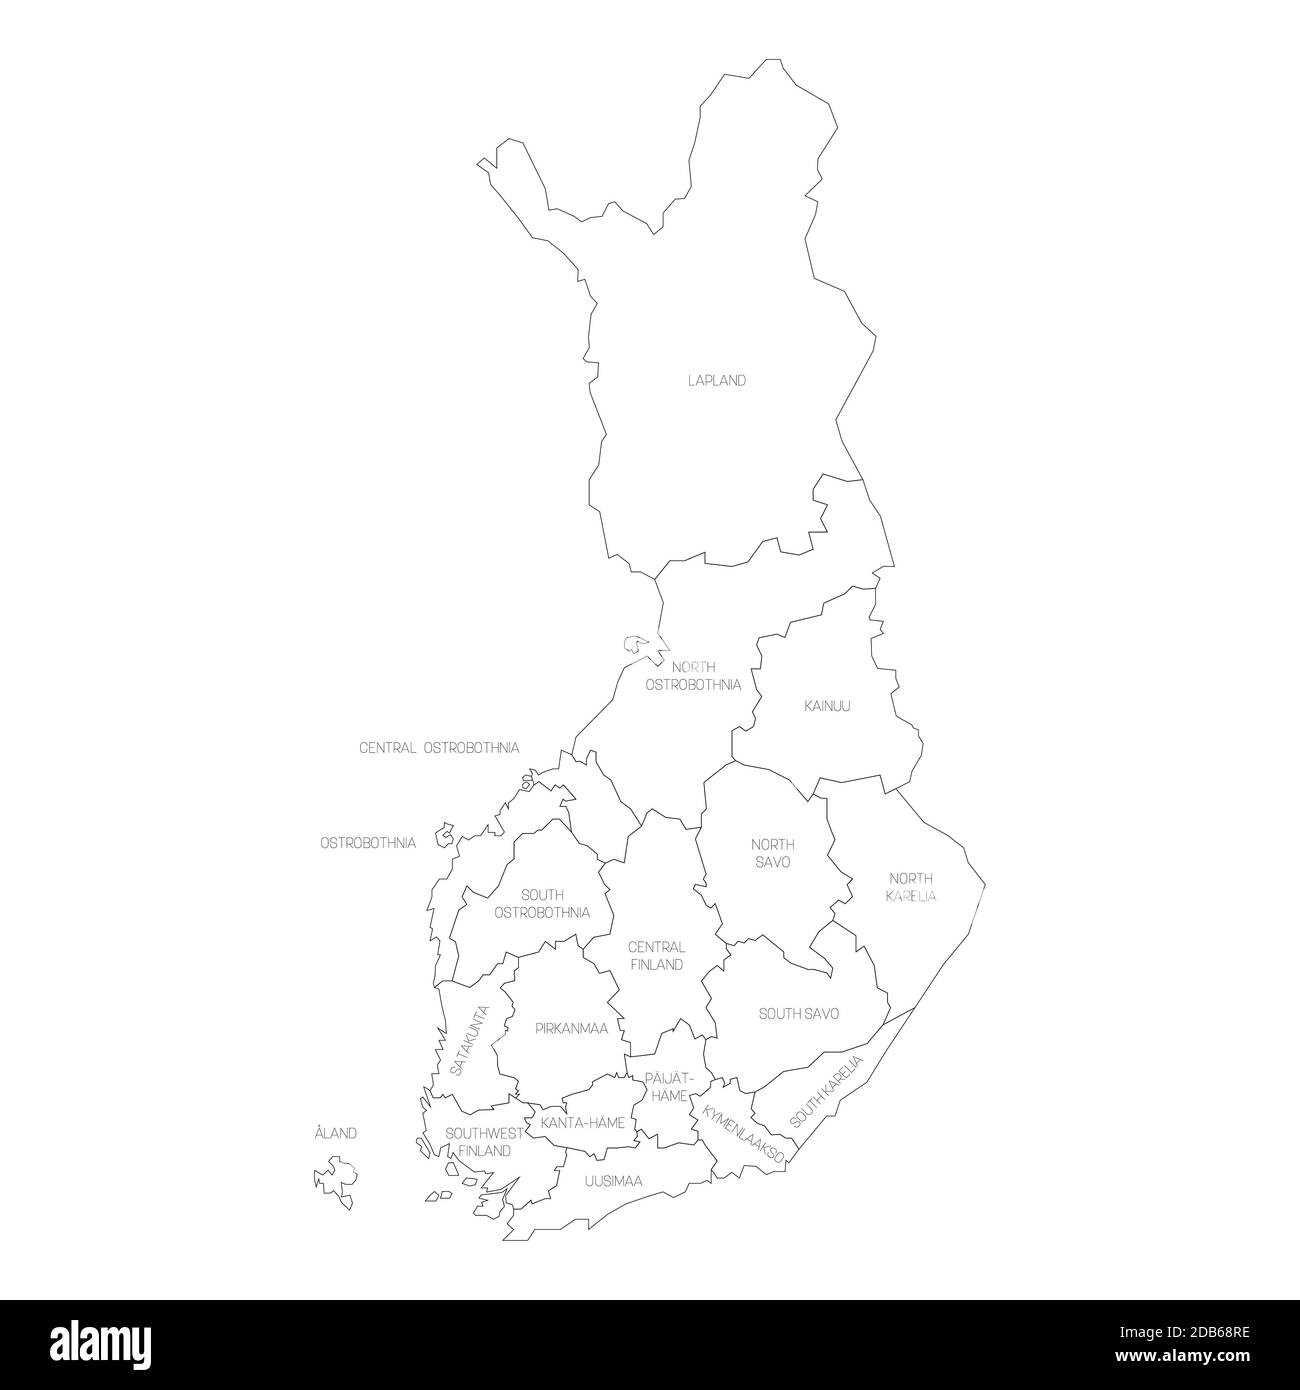 Black outline political map of Finland. Administrative divisions - regions. Simple vector map with labels. Stock Vector